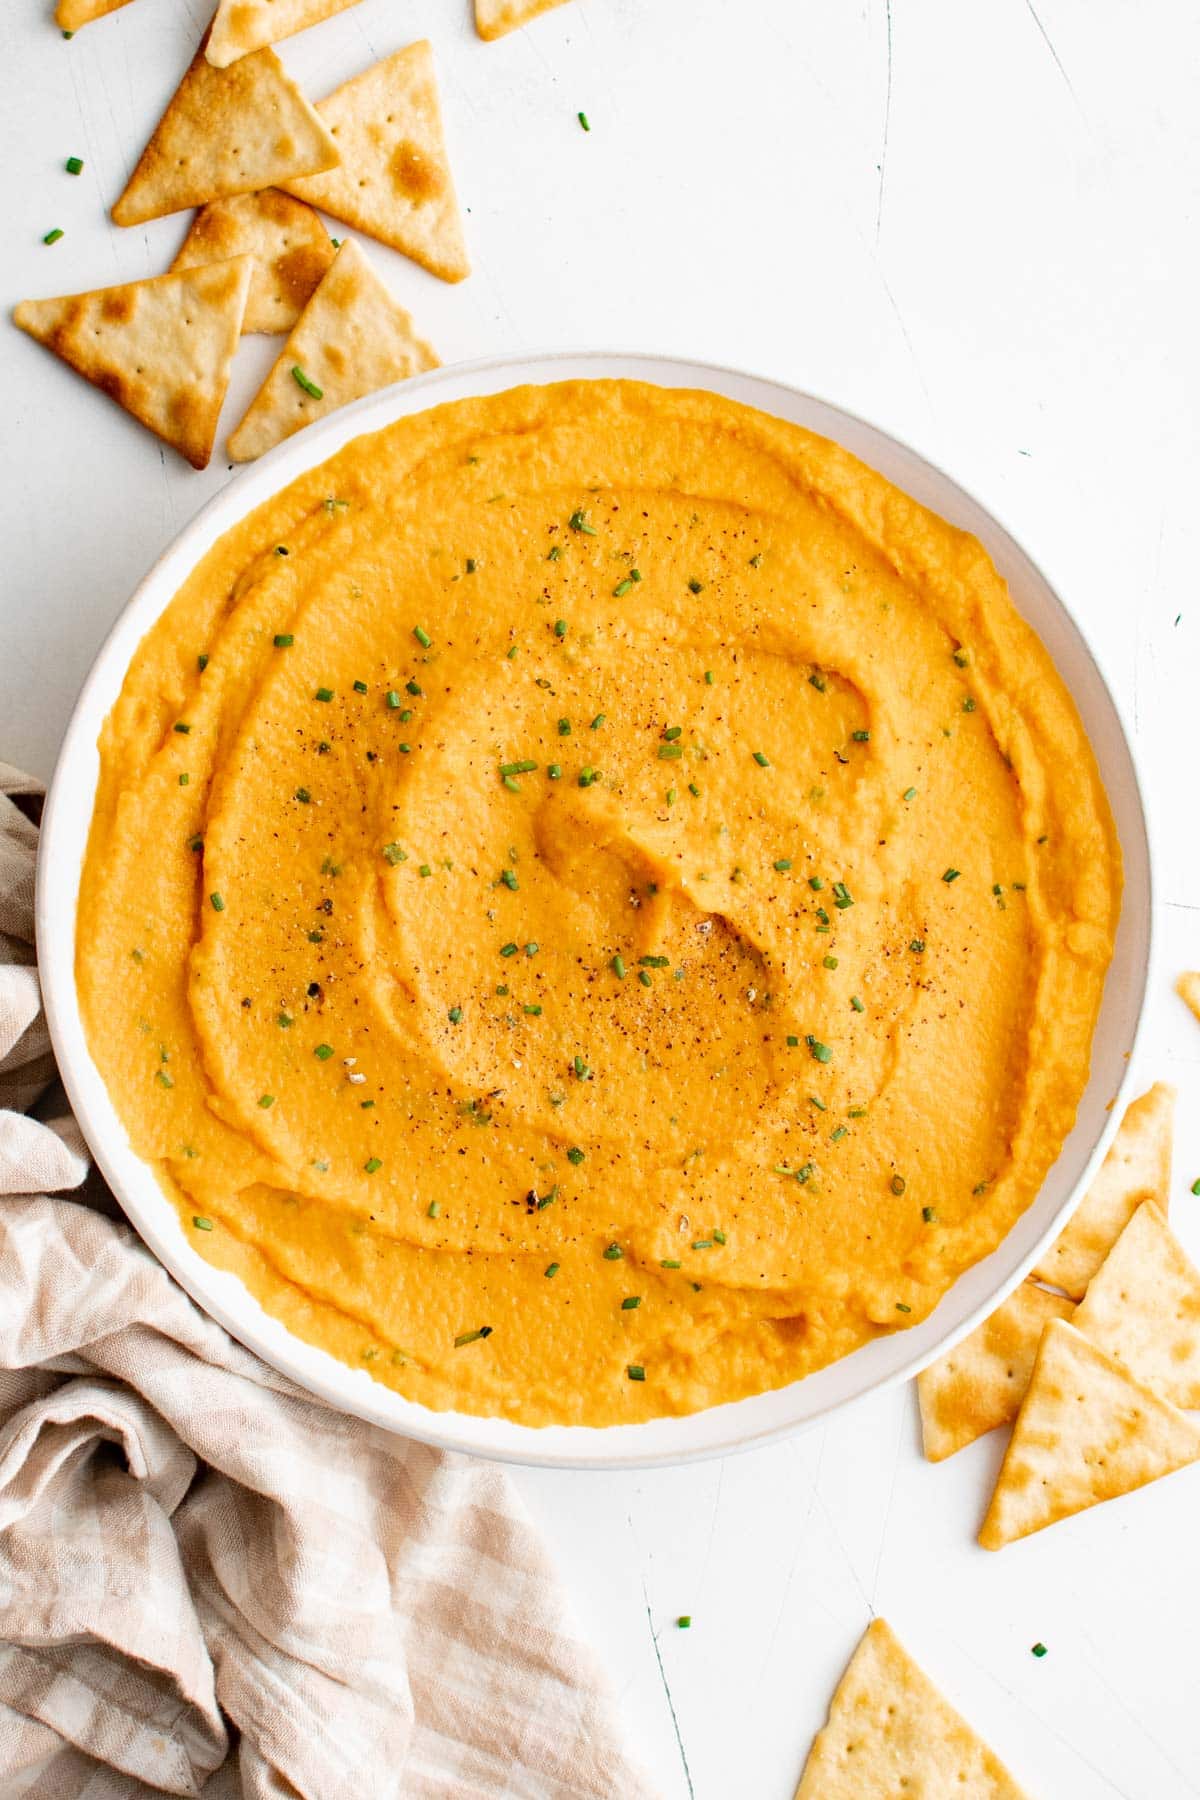 A large bowl of sweet potato dip with chives, and pita triangles scattered around